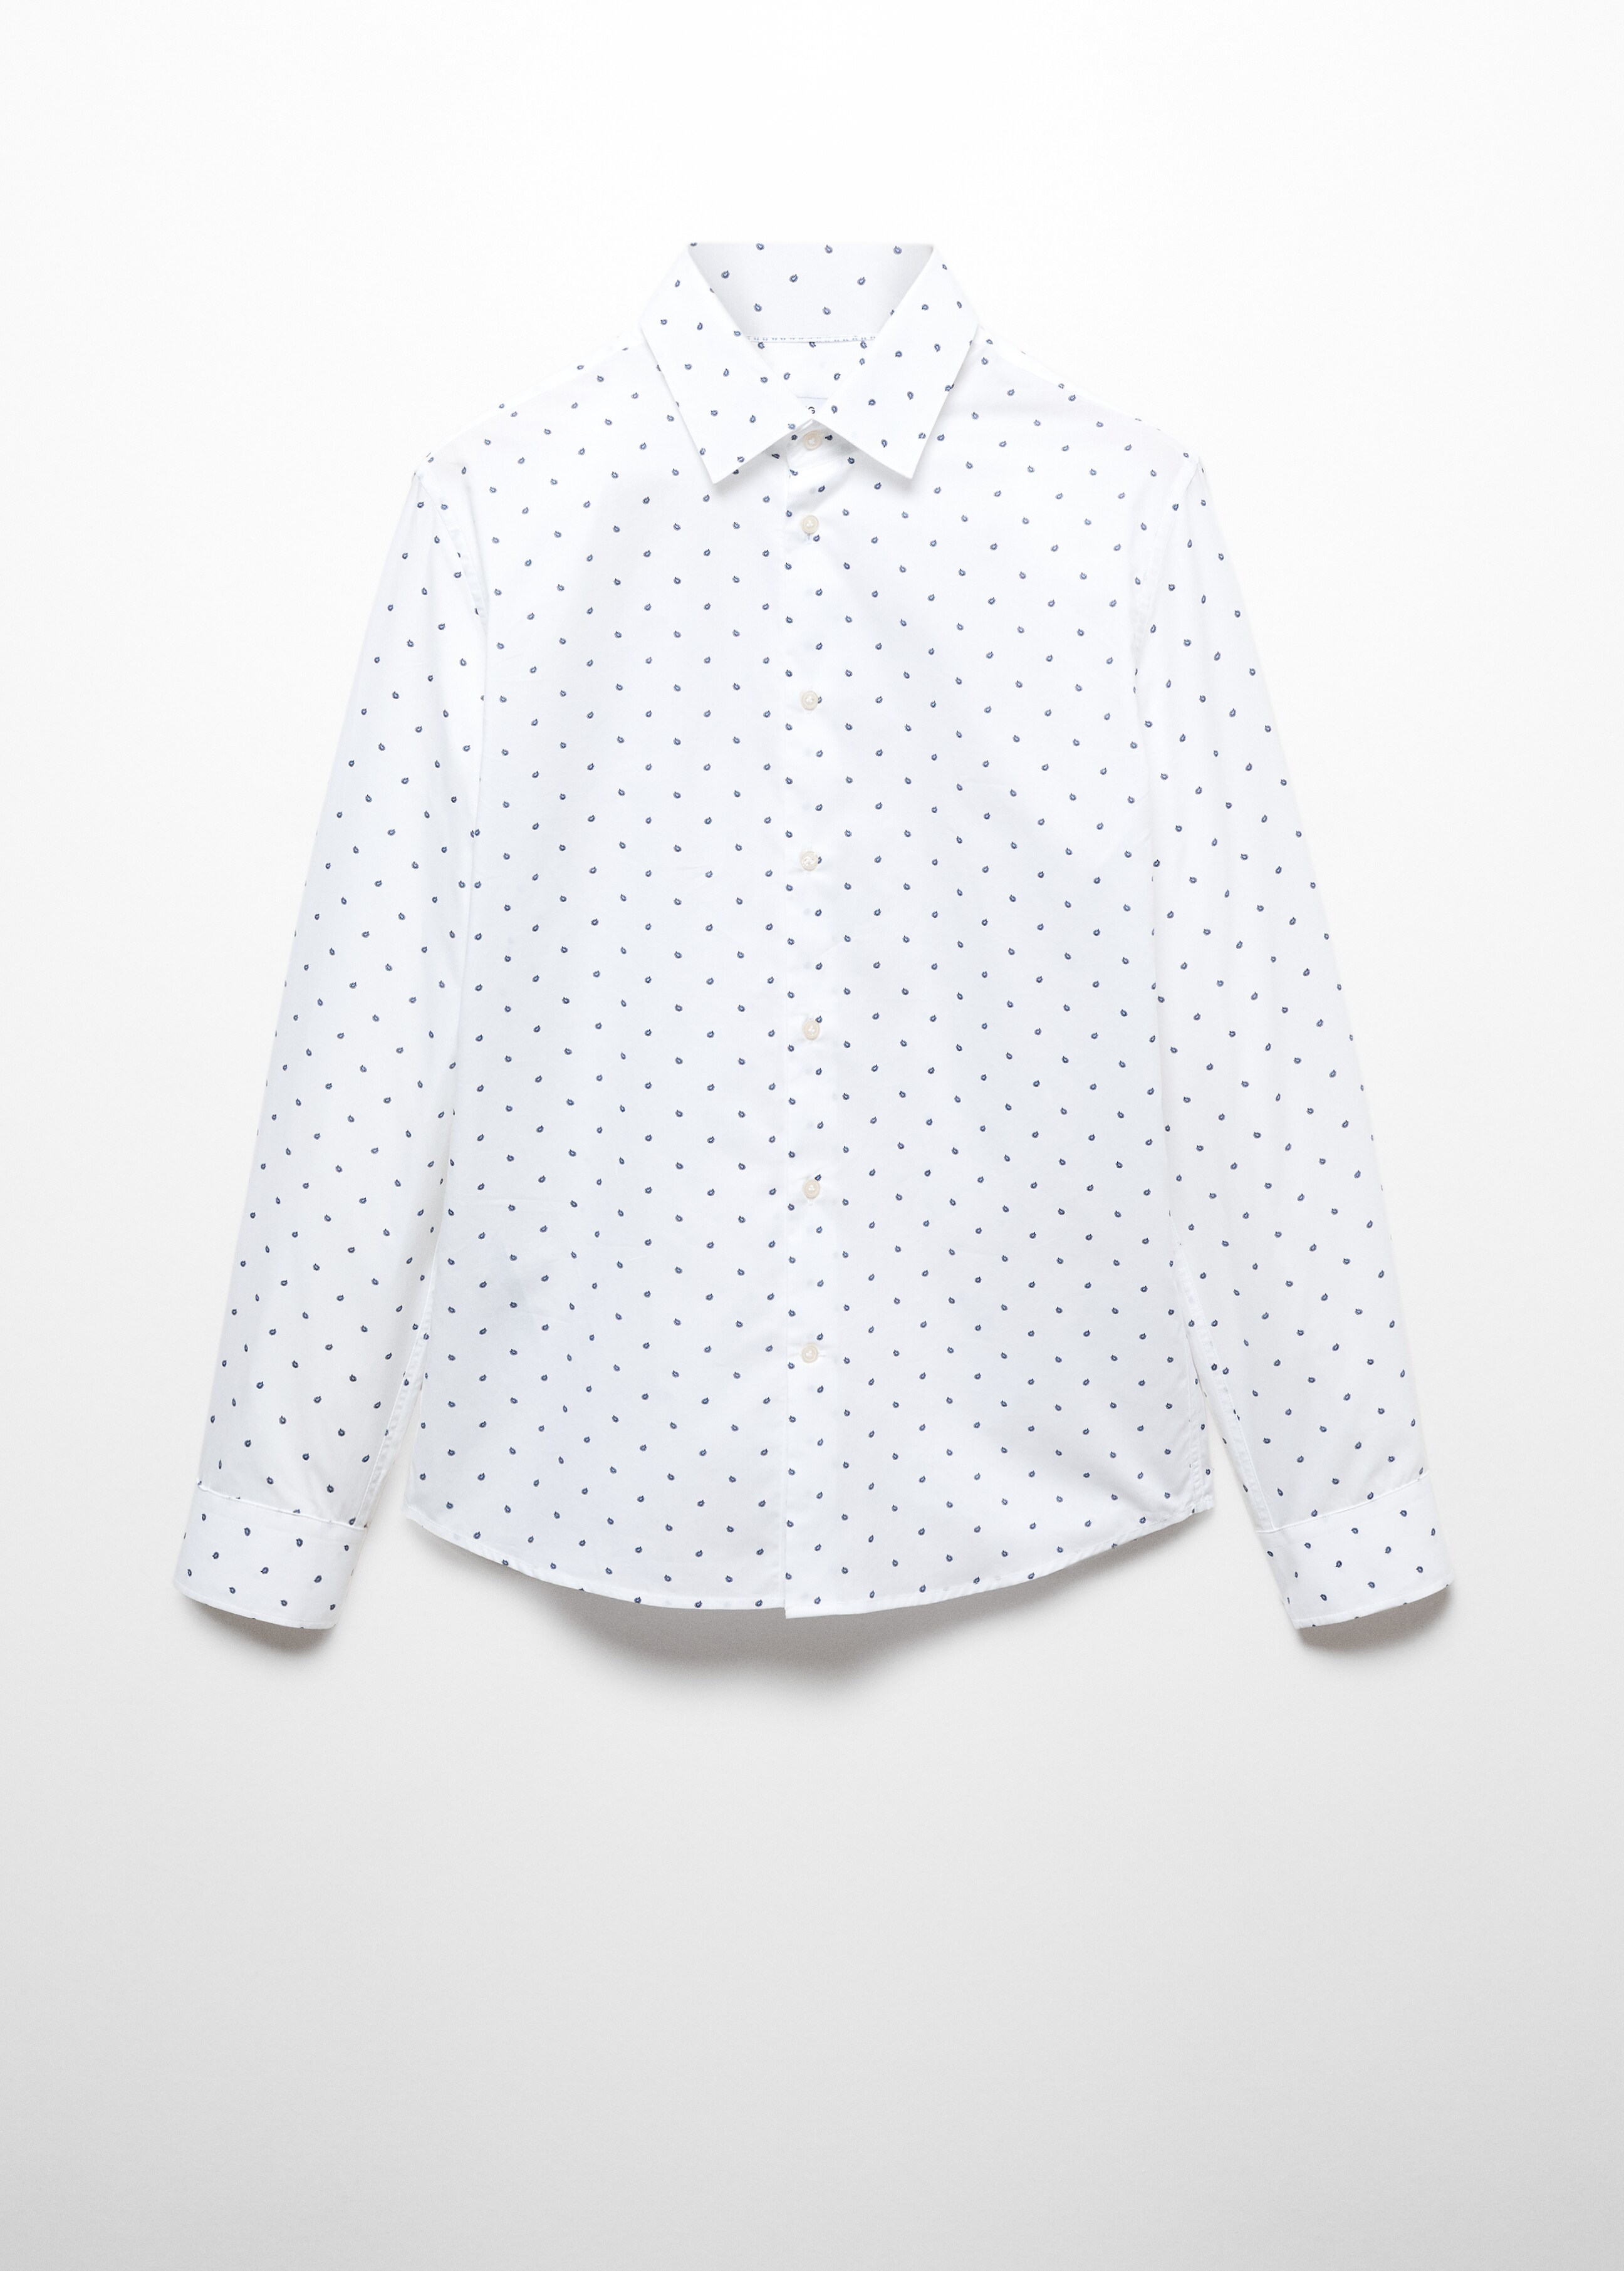 100% cotton printed shirt - Article without model